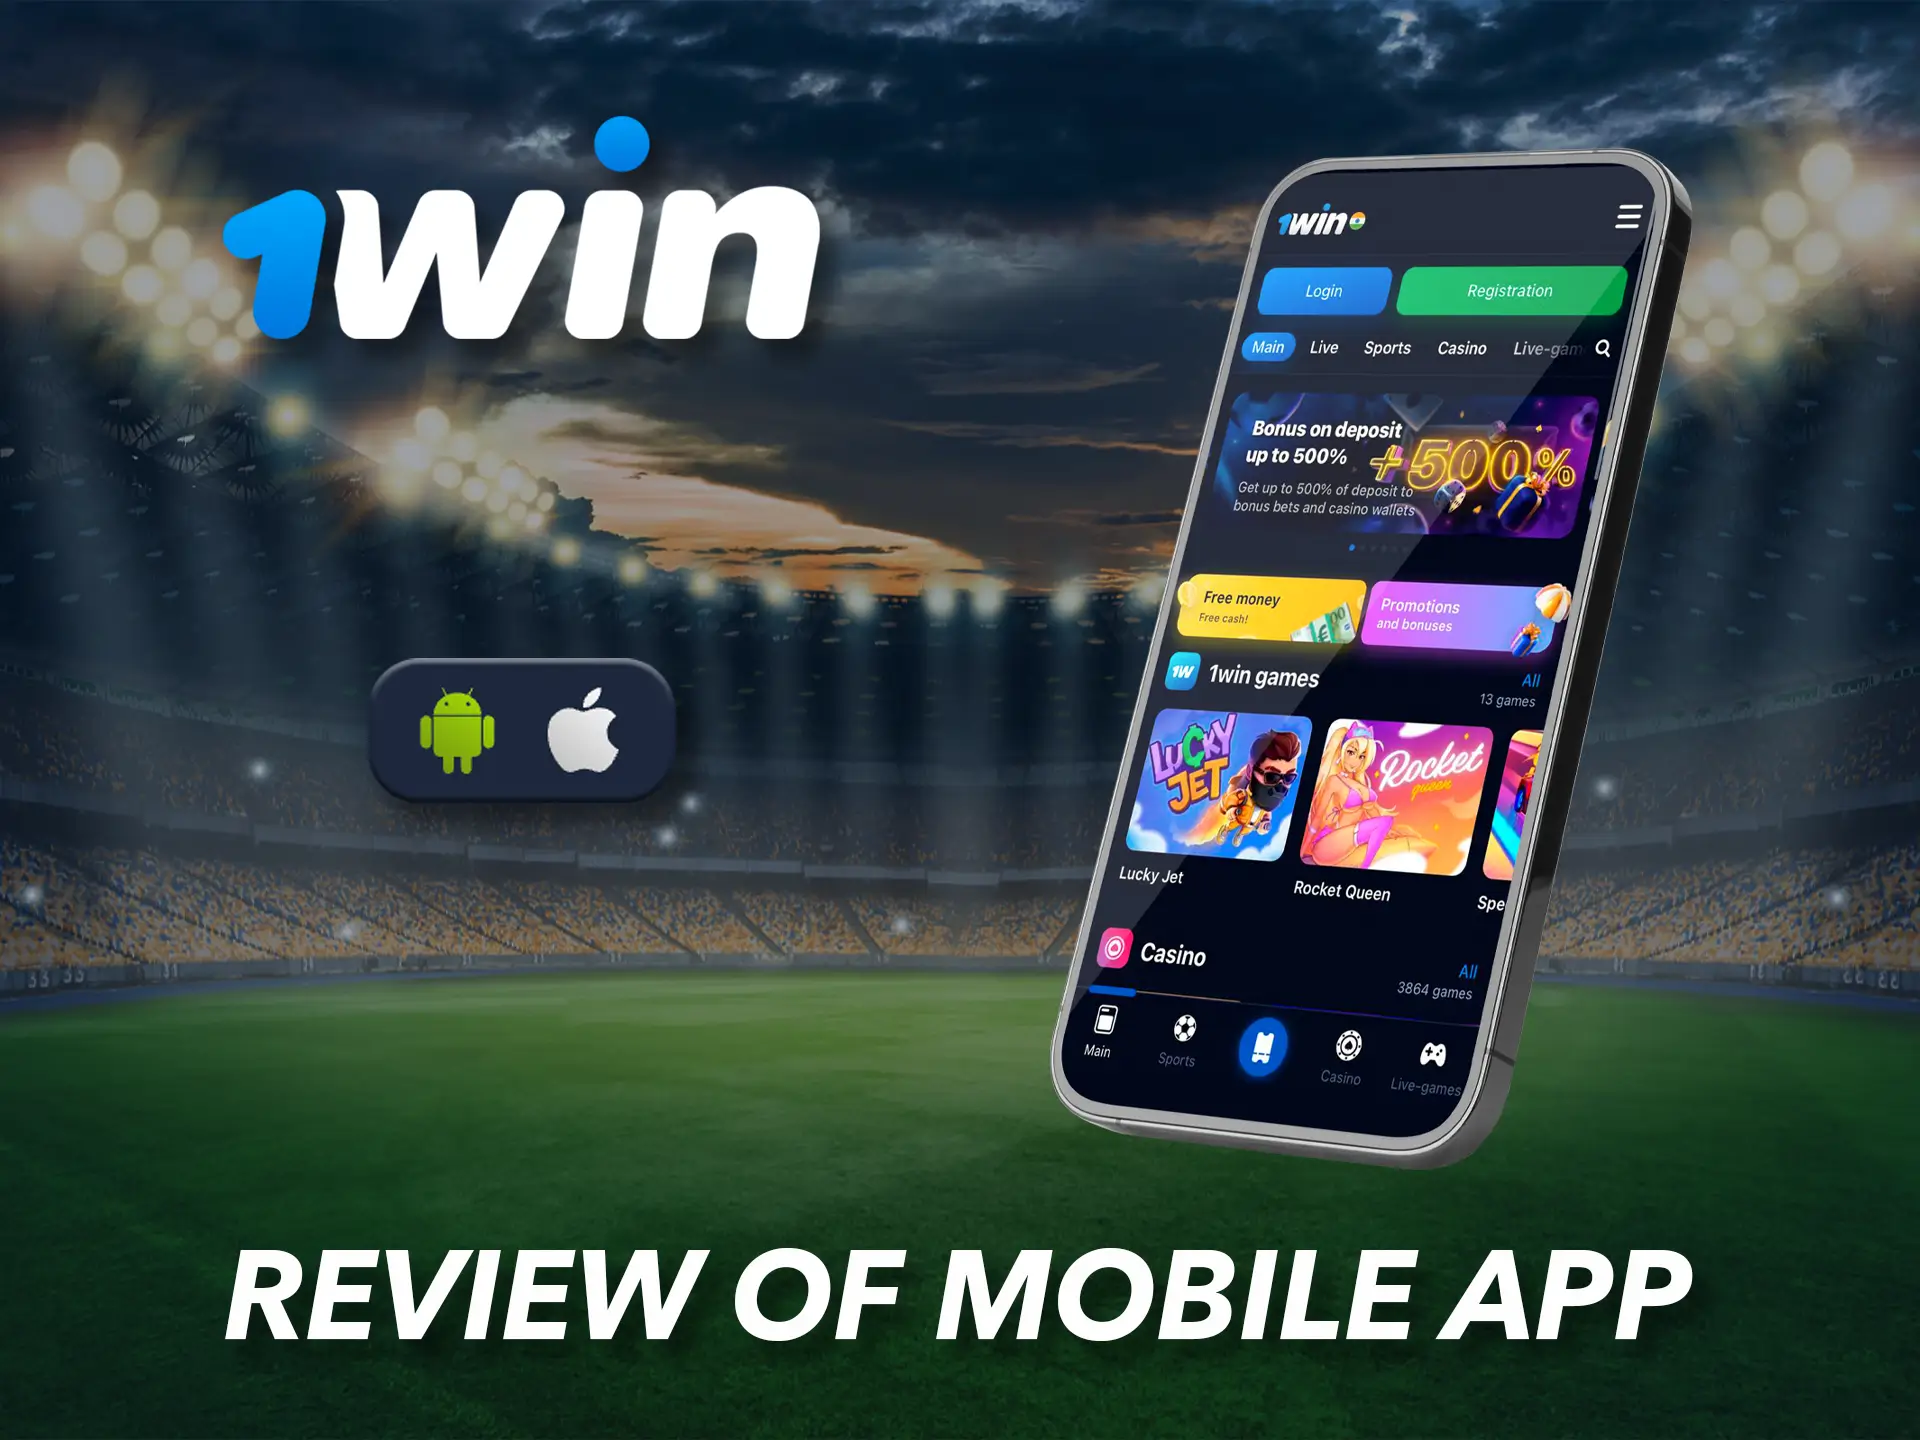 Use the user-friendly 1Win app, which works great on any device.